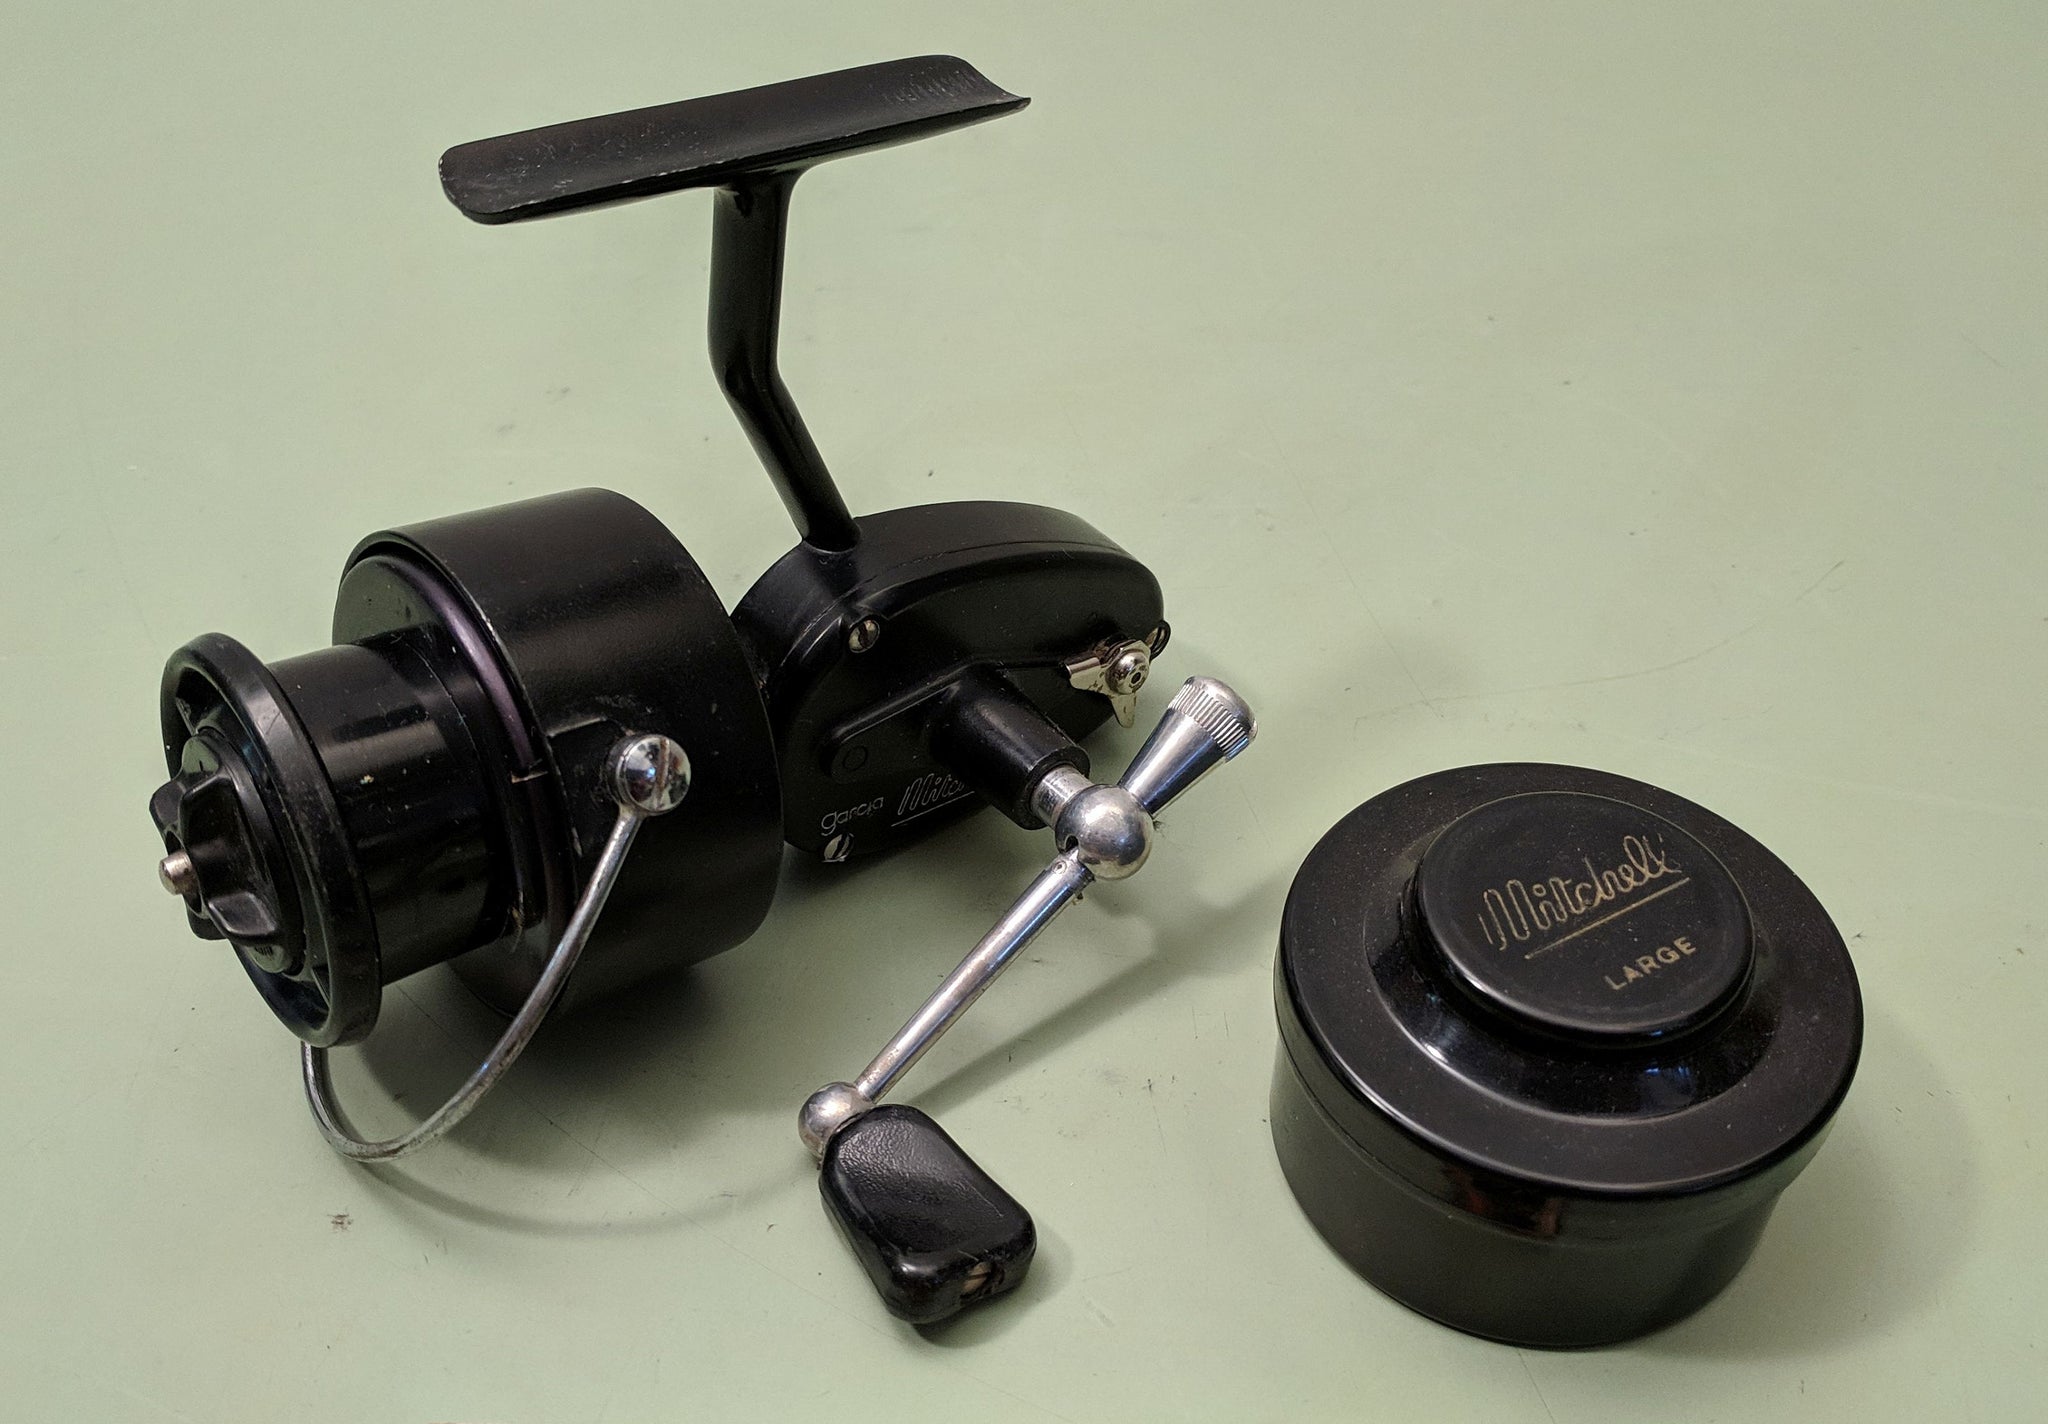 Classic Garcia Mitchell 300 Spinning Reel